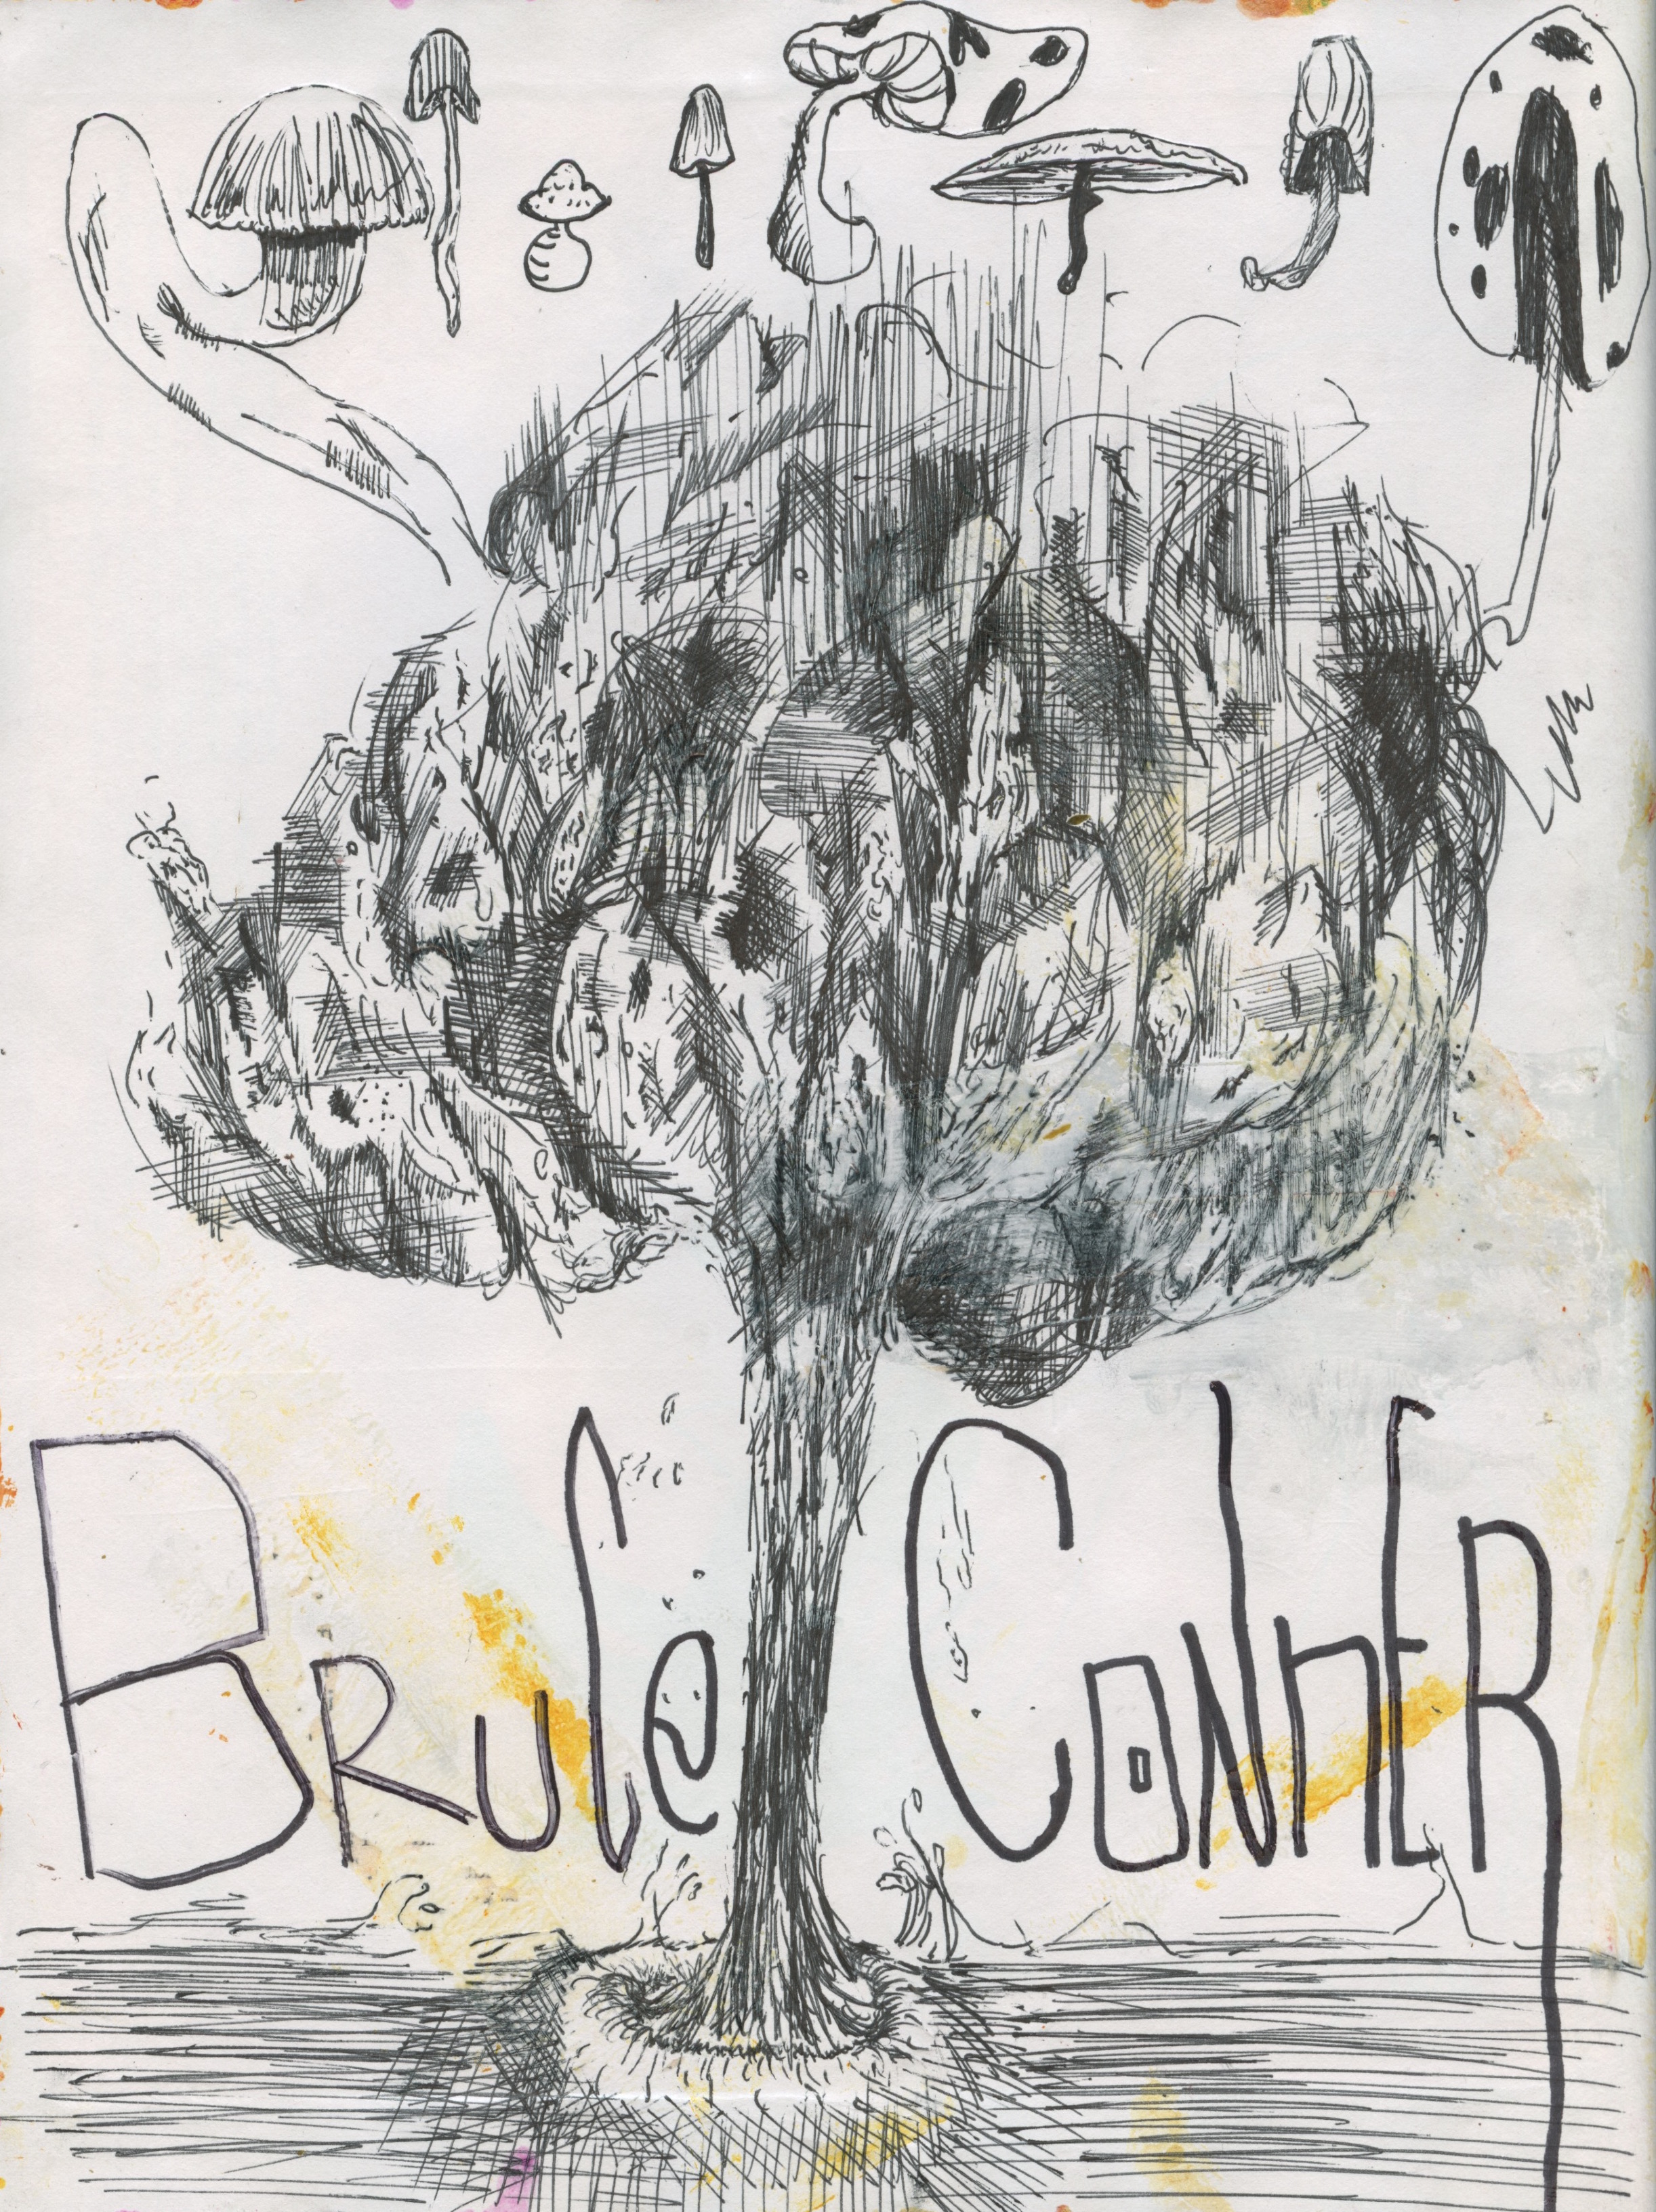 Moma: Bruce Conner